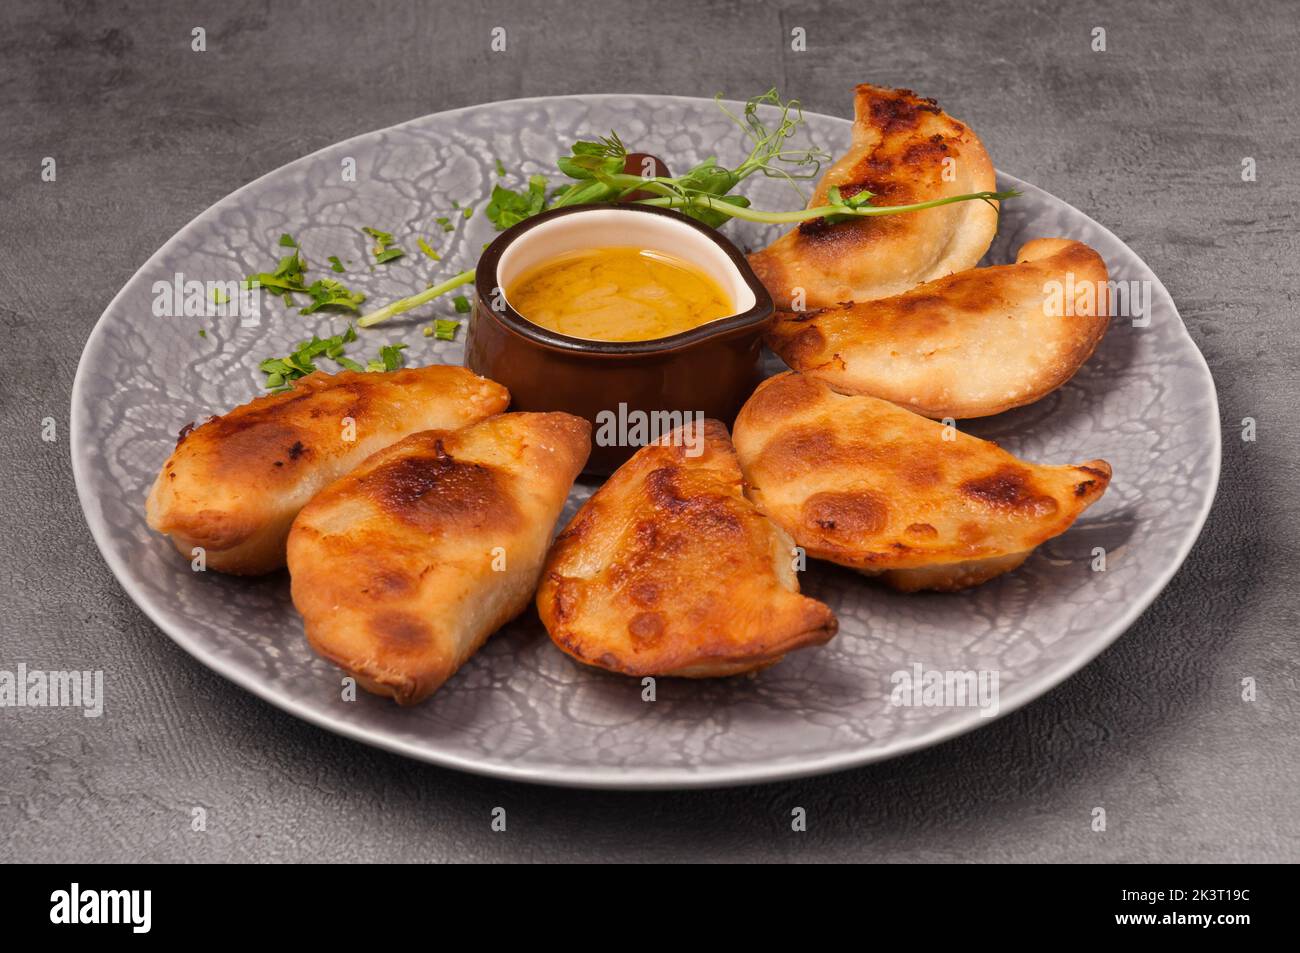 posikunchiki - small pies with meat and mustard sauce Stock Photo